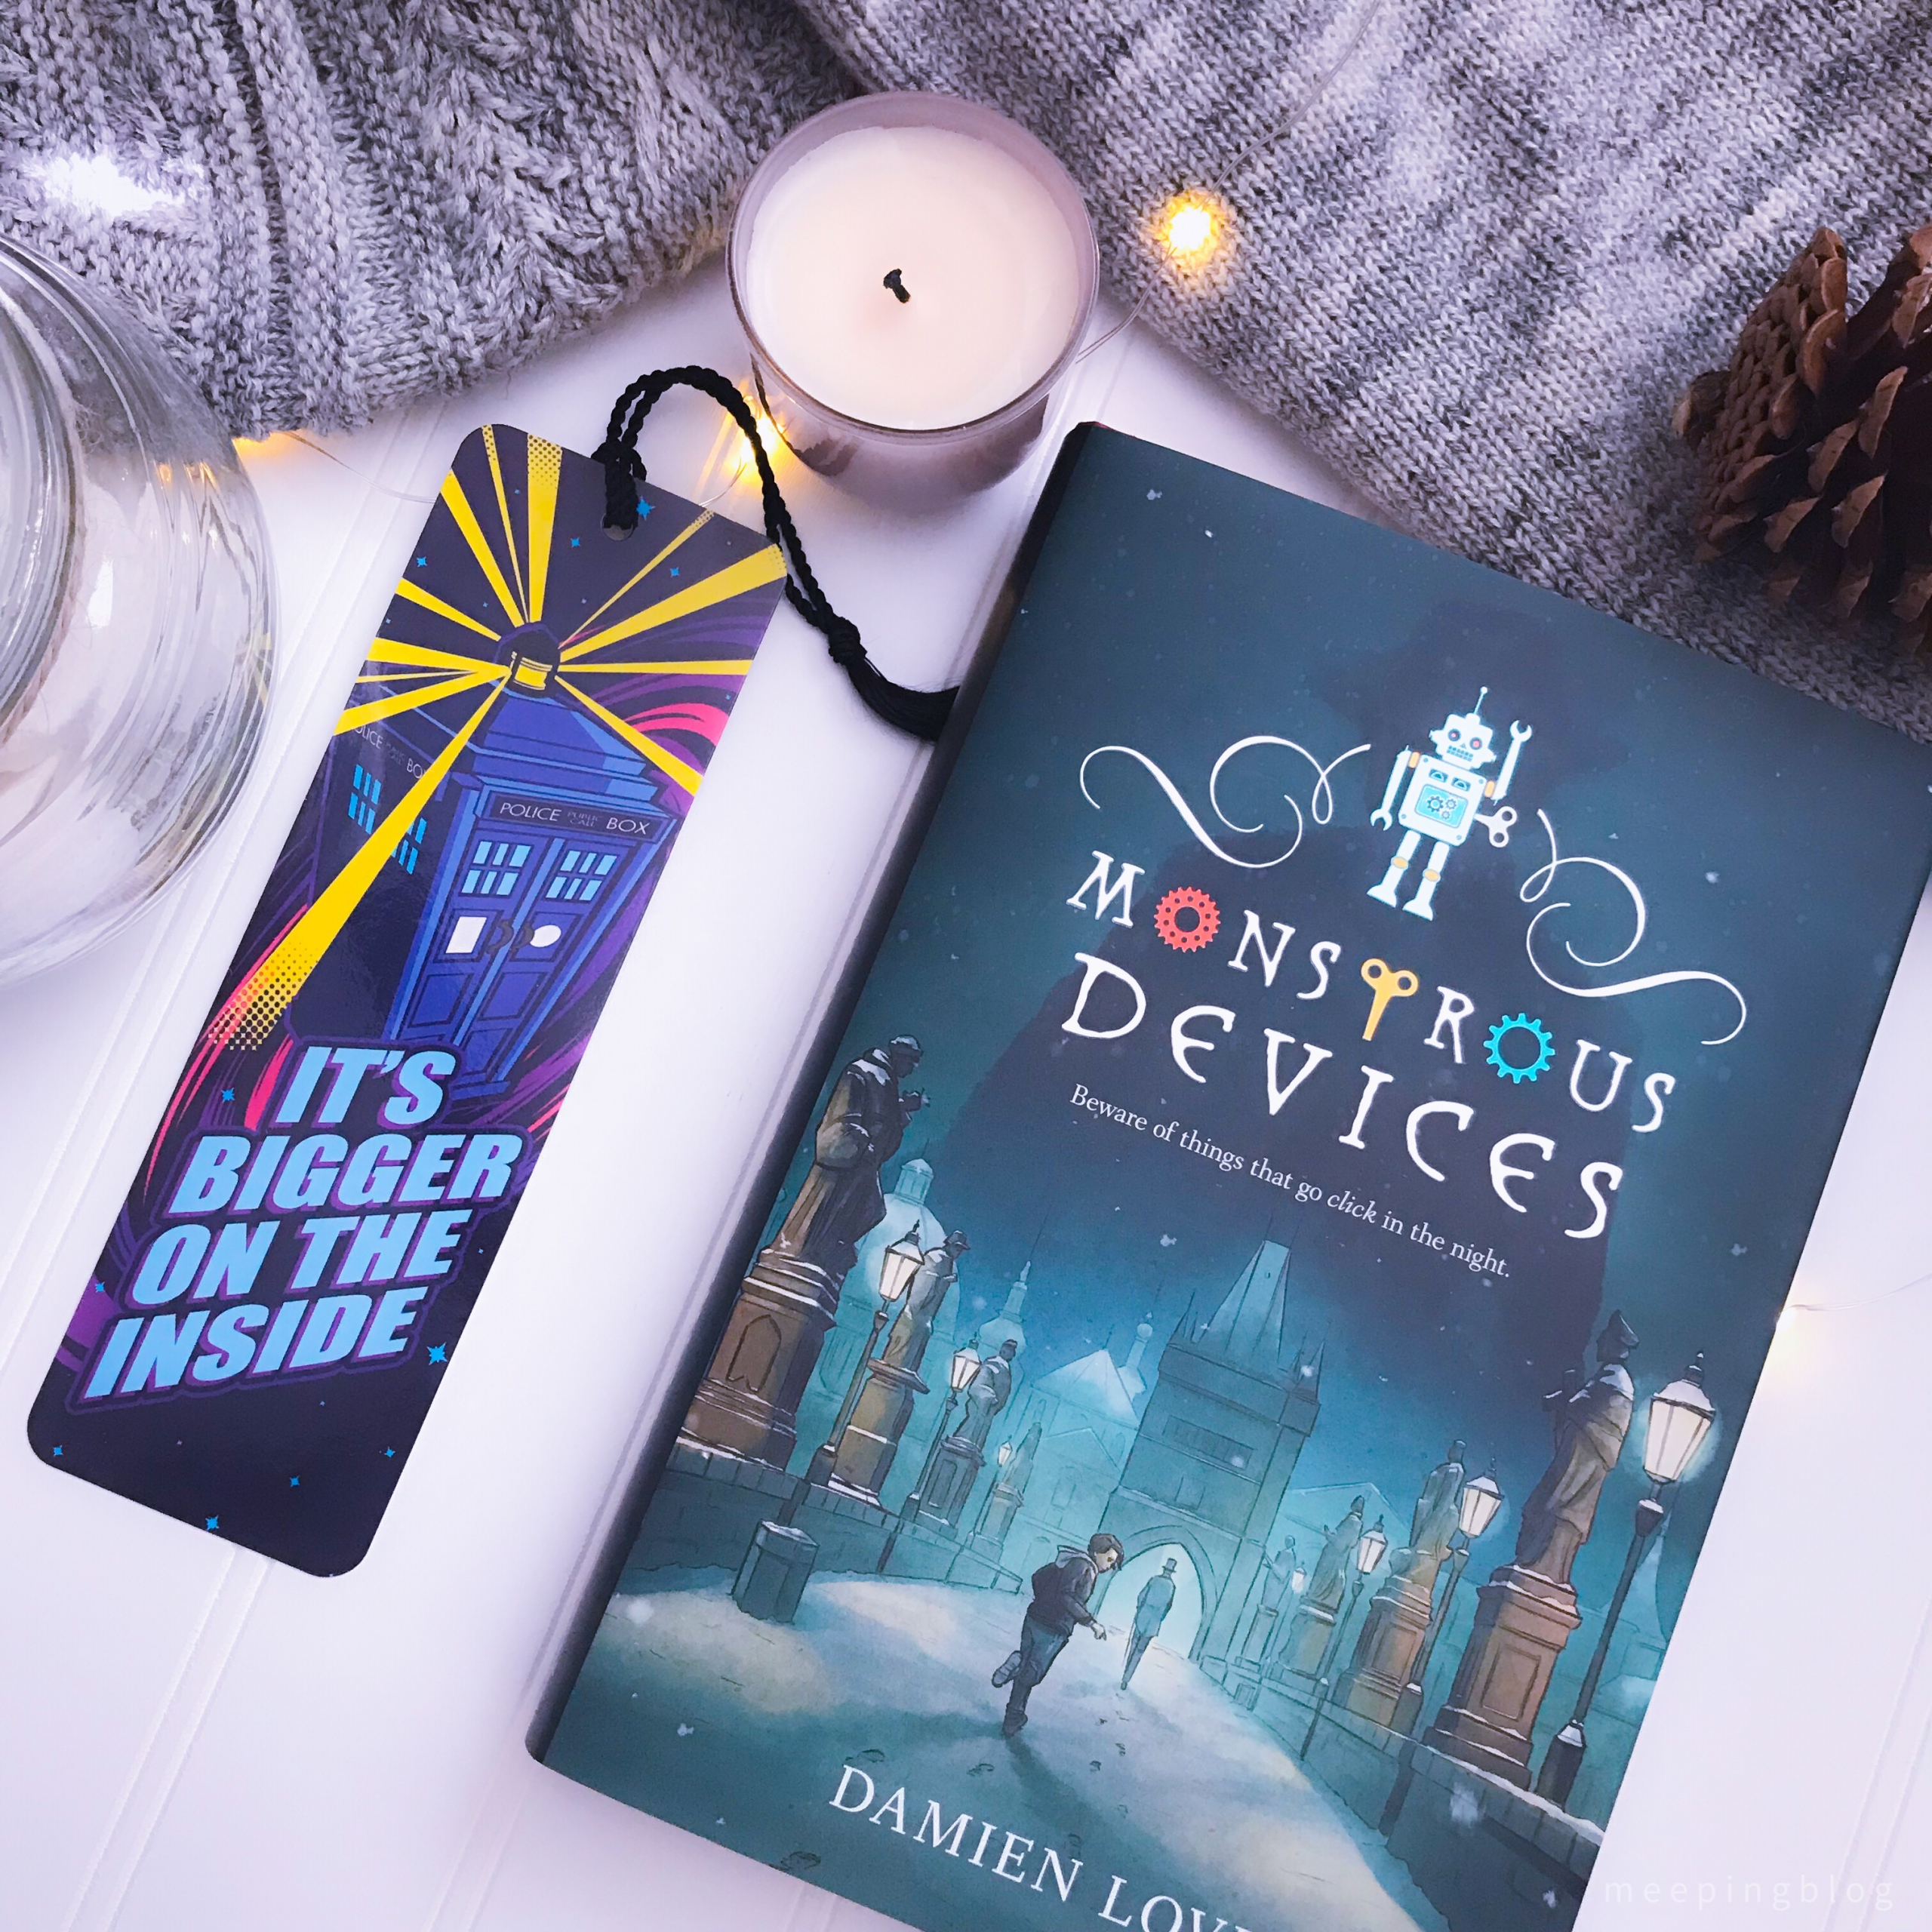 Monstrous Devices by Damien Love | Book Review